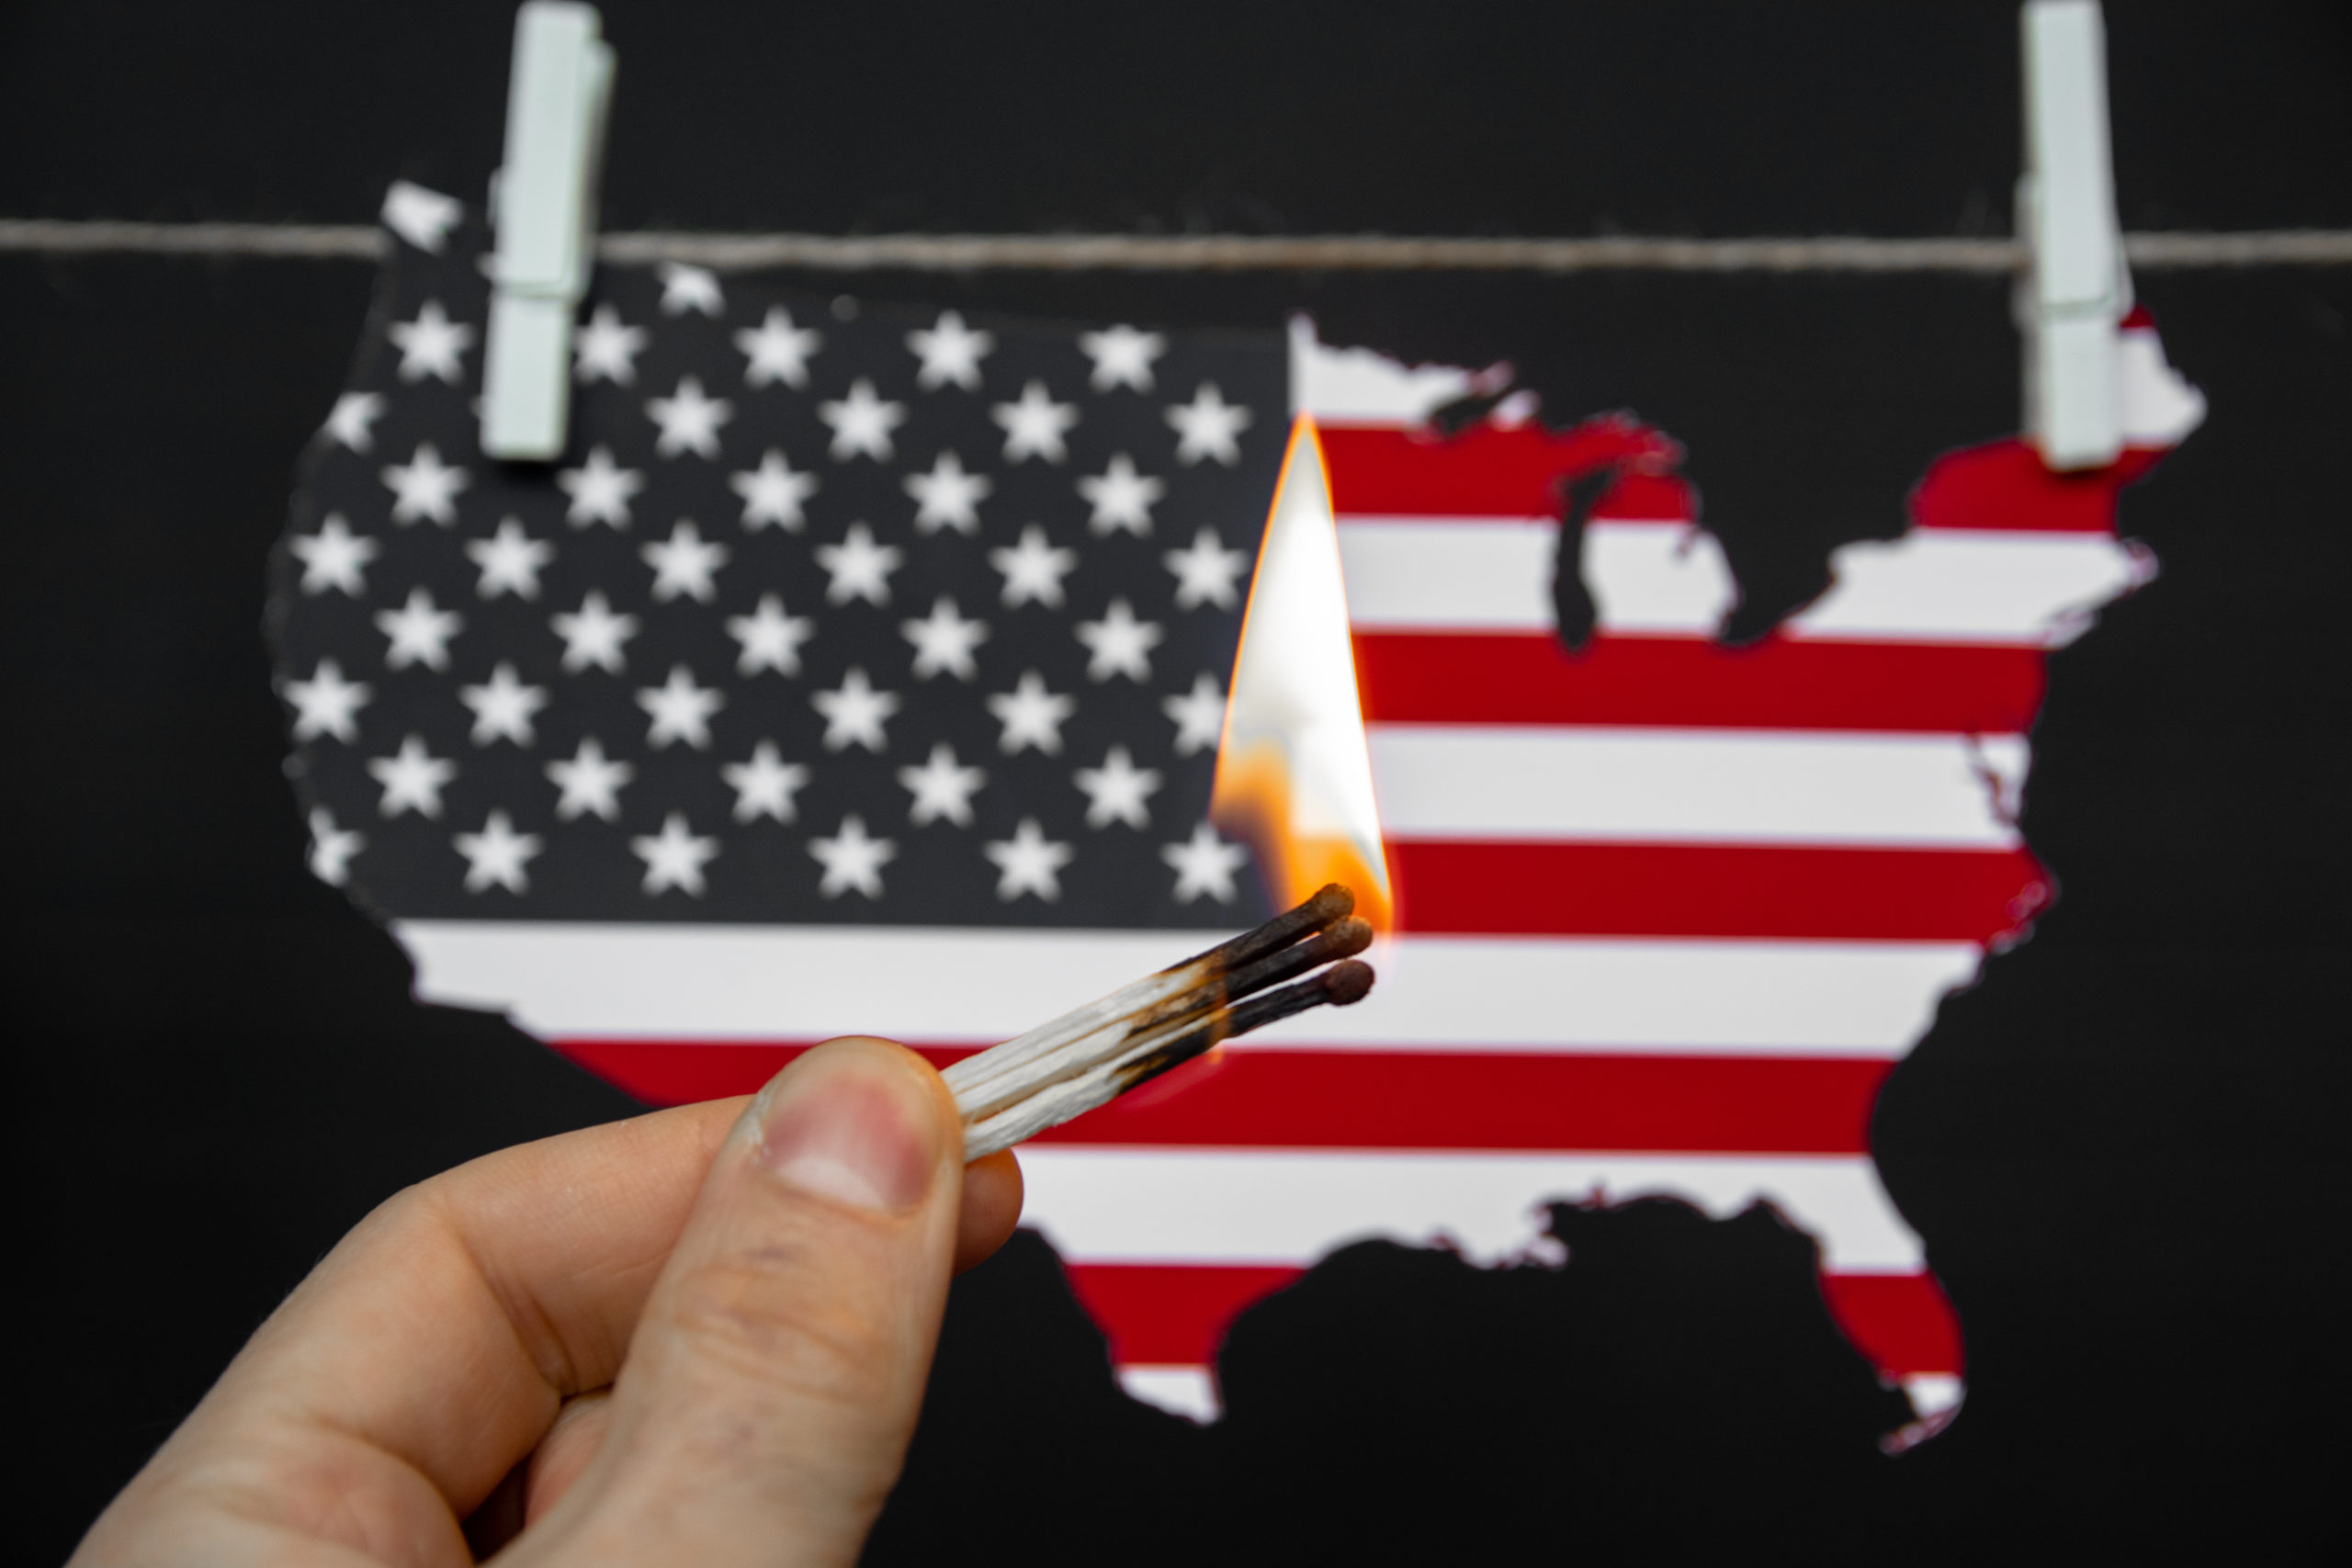 map of america USA burning match - as a symbol of incitement